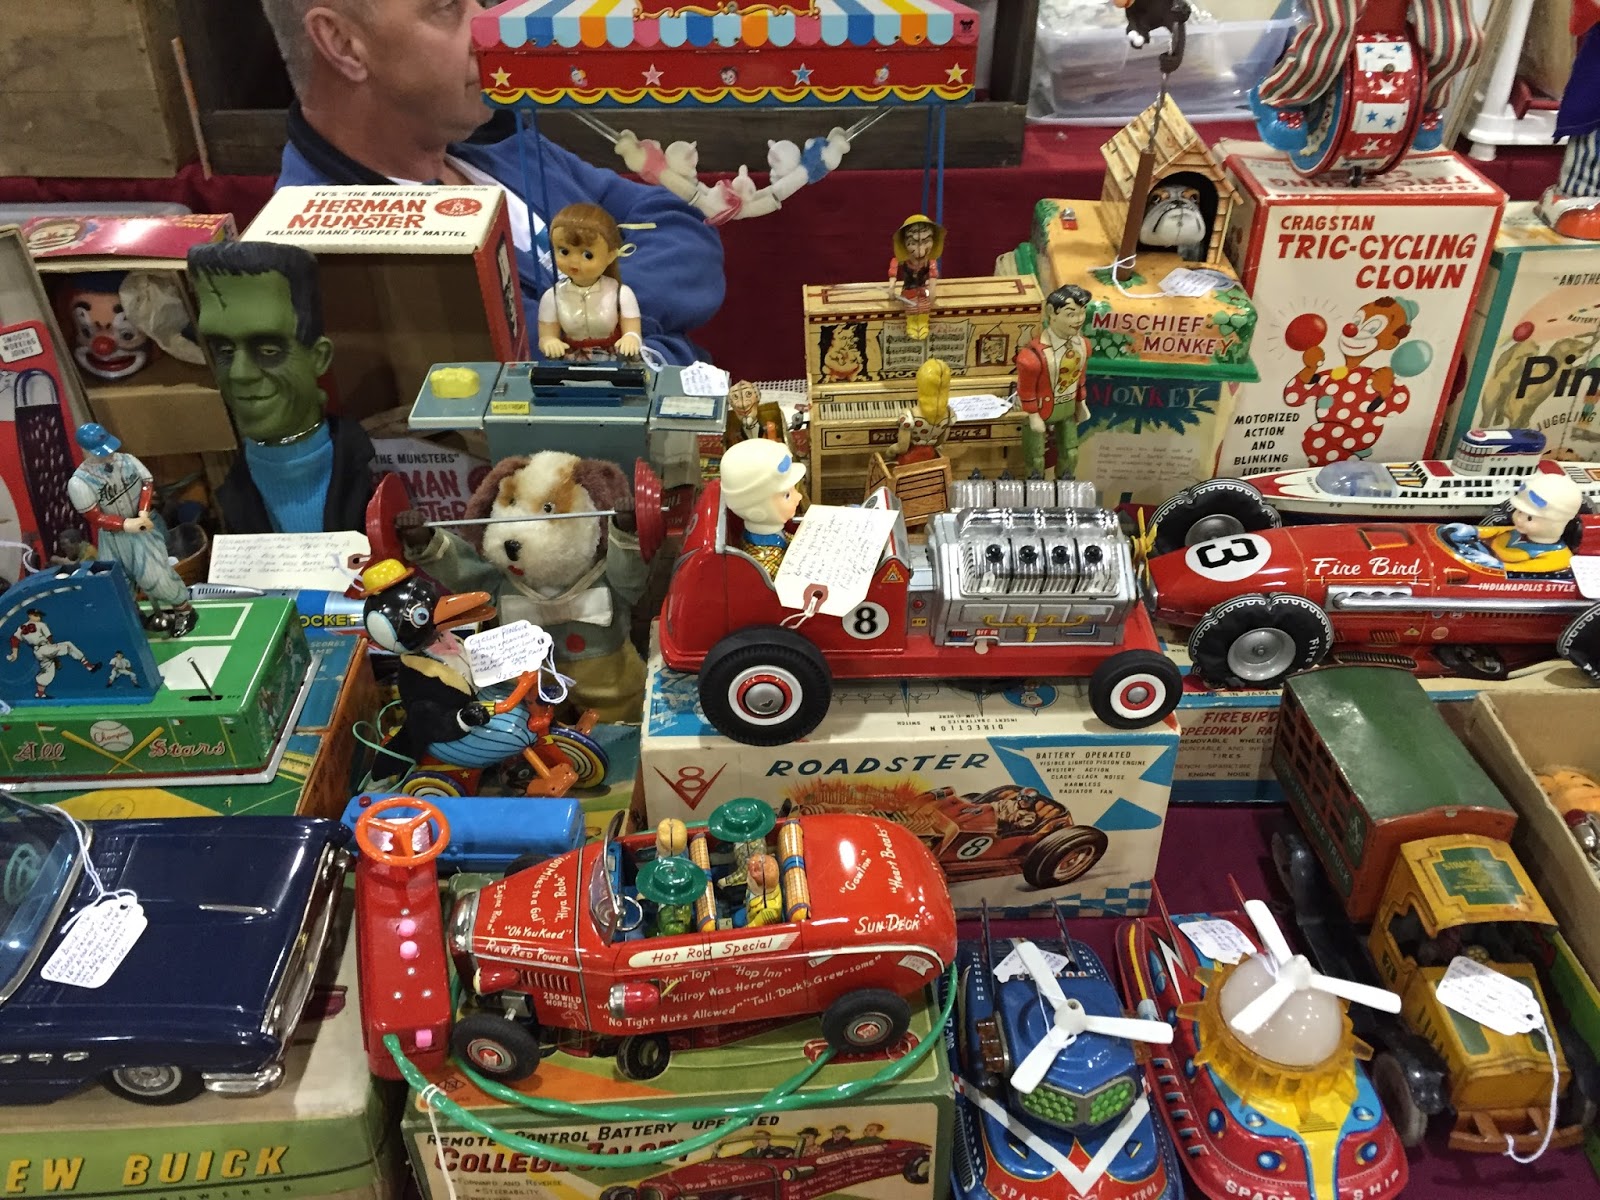 Martin Grams: The Value of Antique Toy Shows